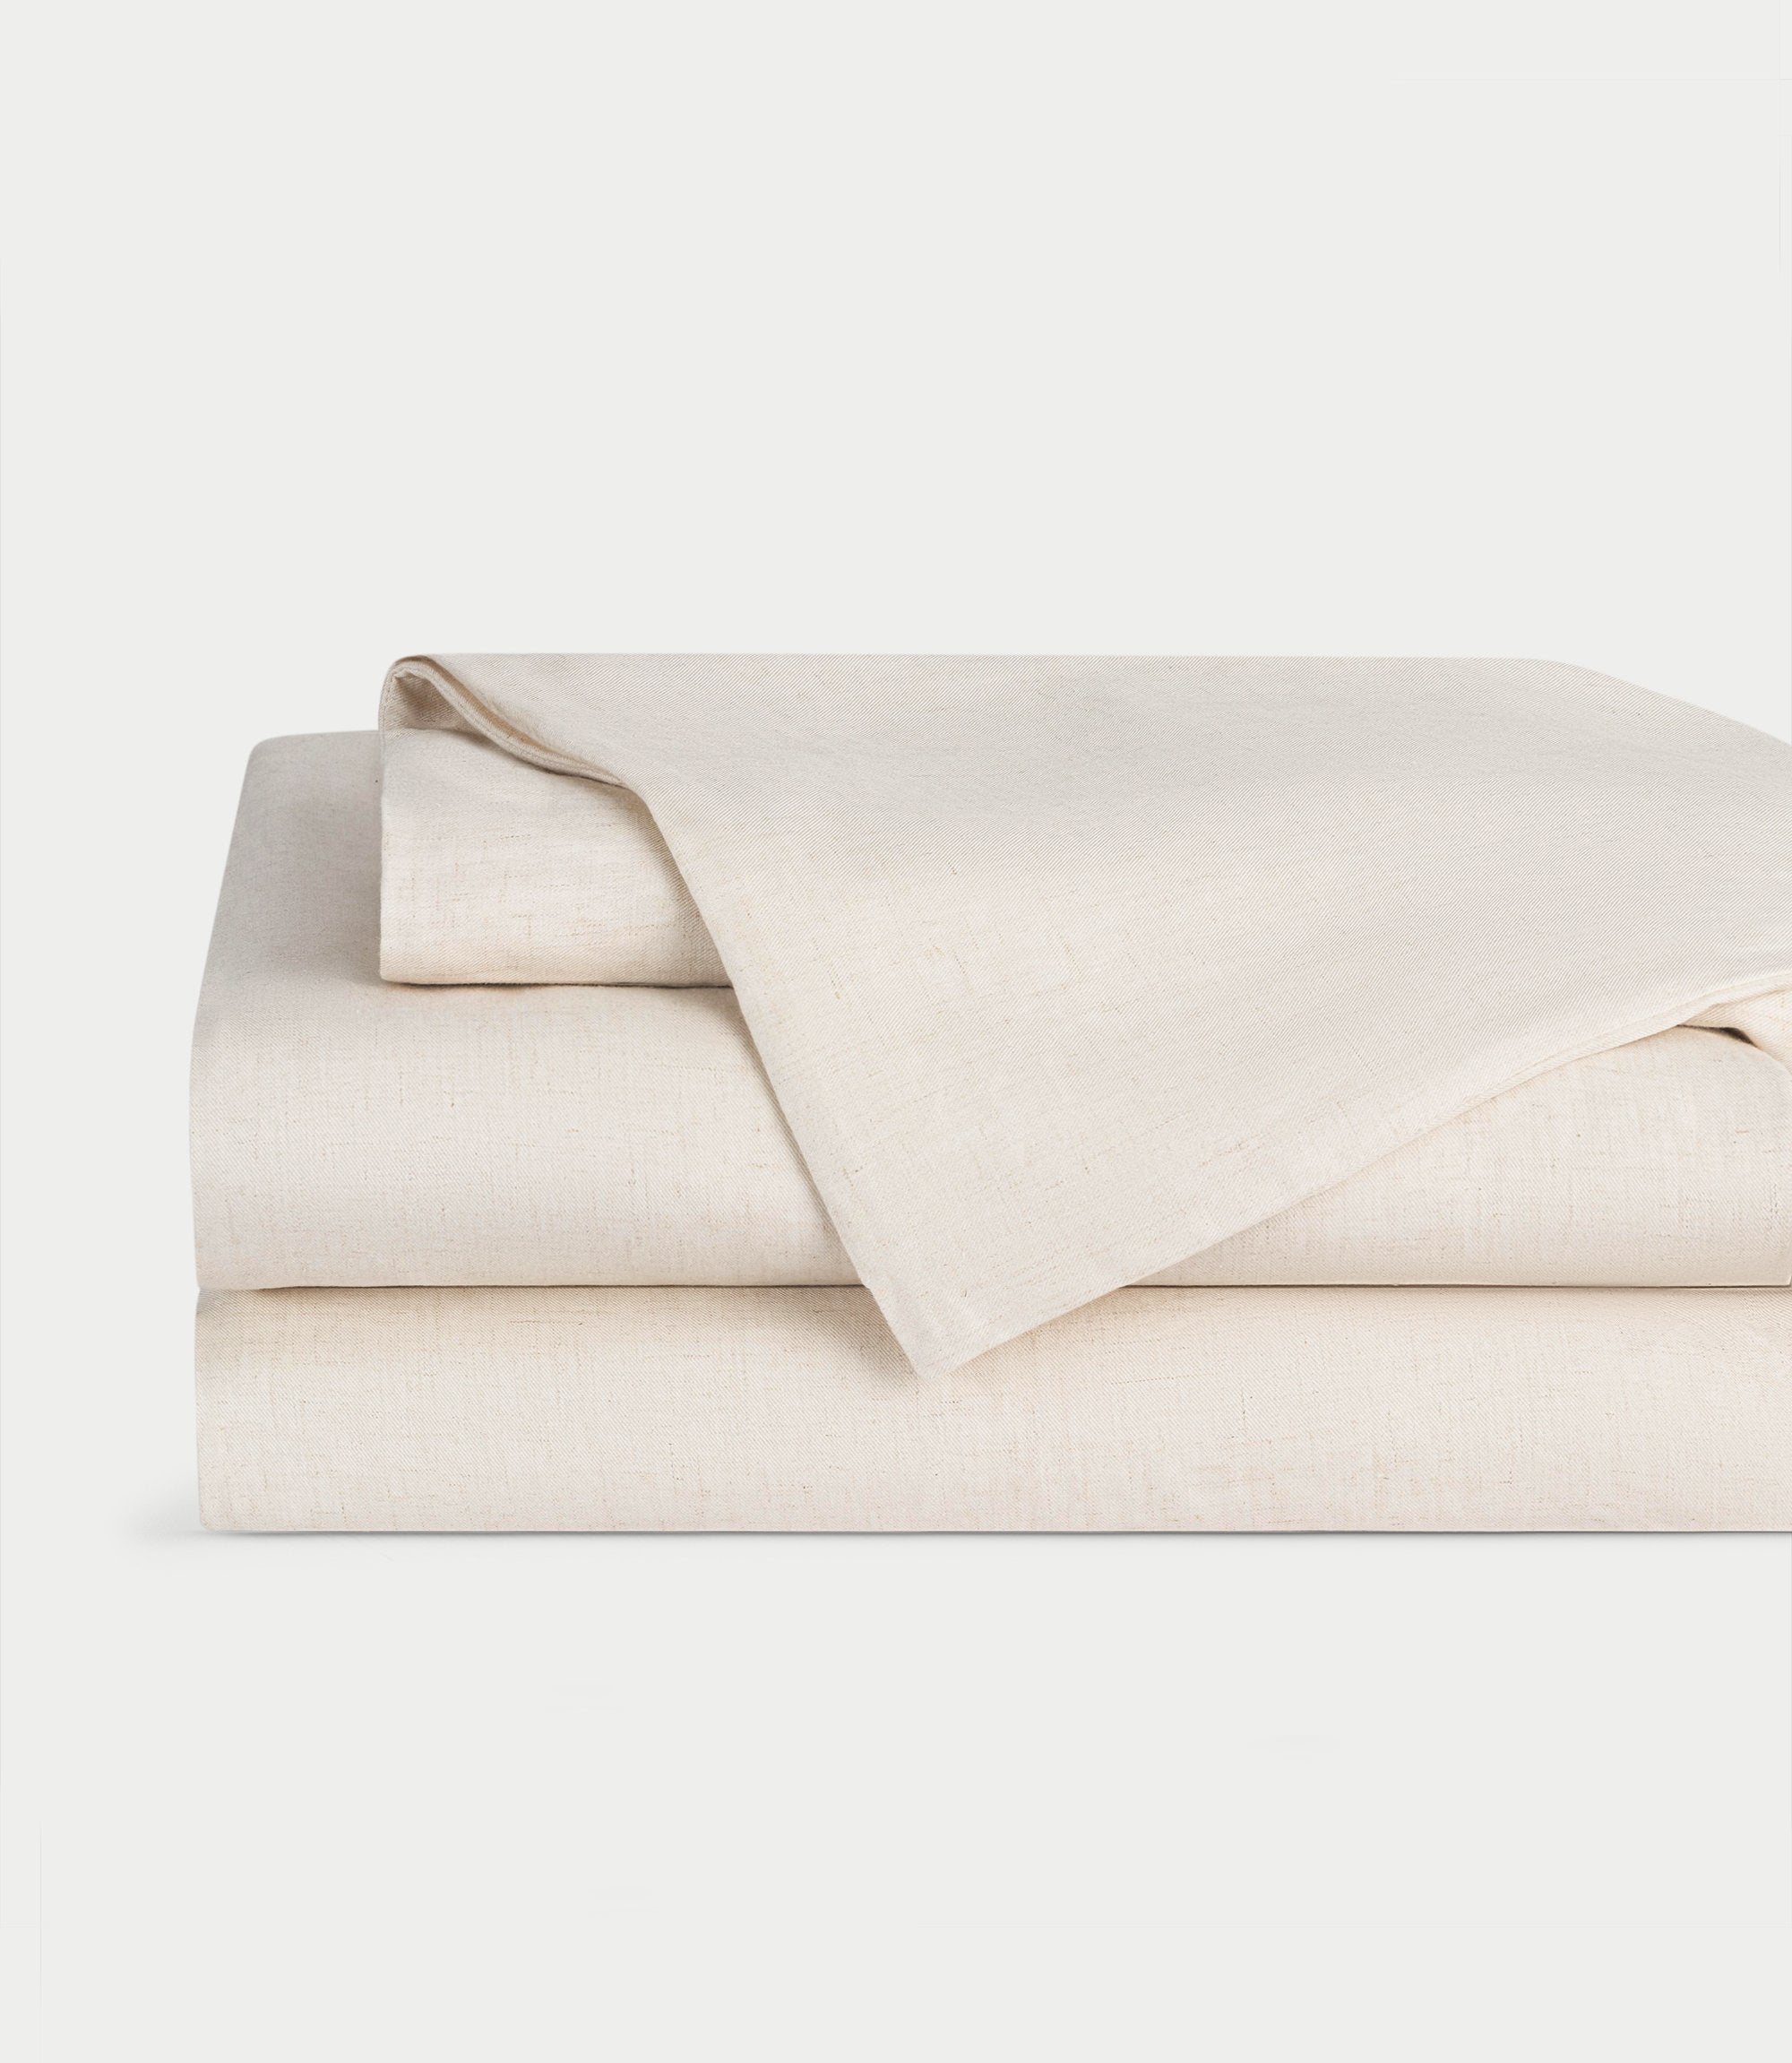 Natural Bamboo Linen Sheet Set neatly folded over a white background. |Color: Natural